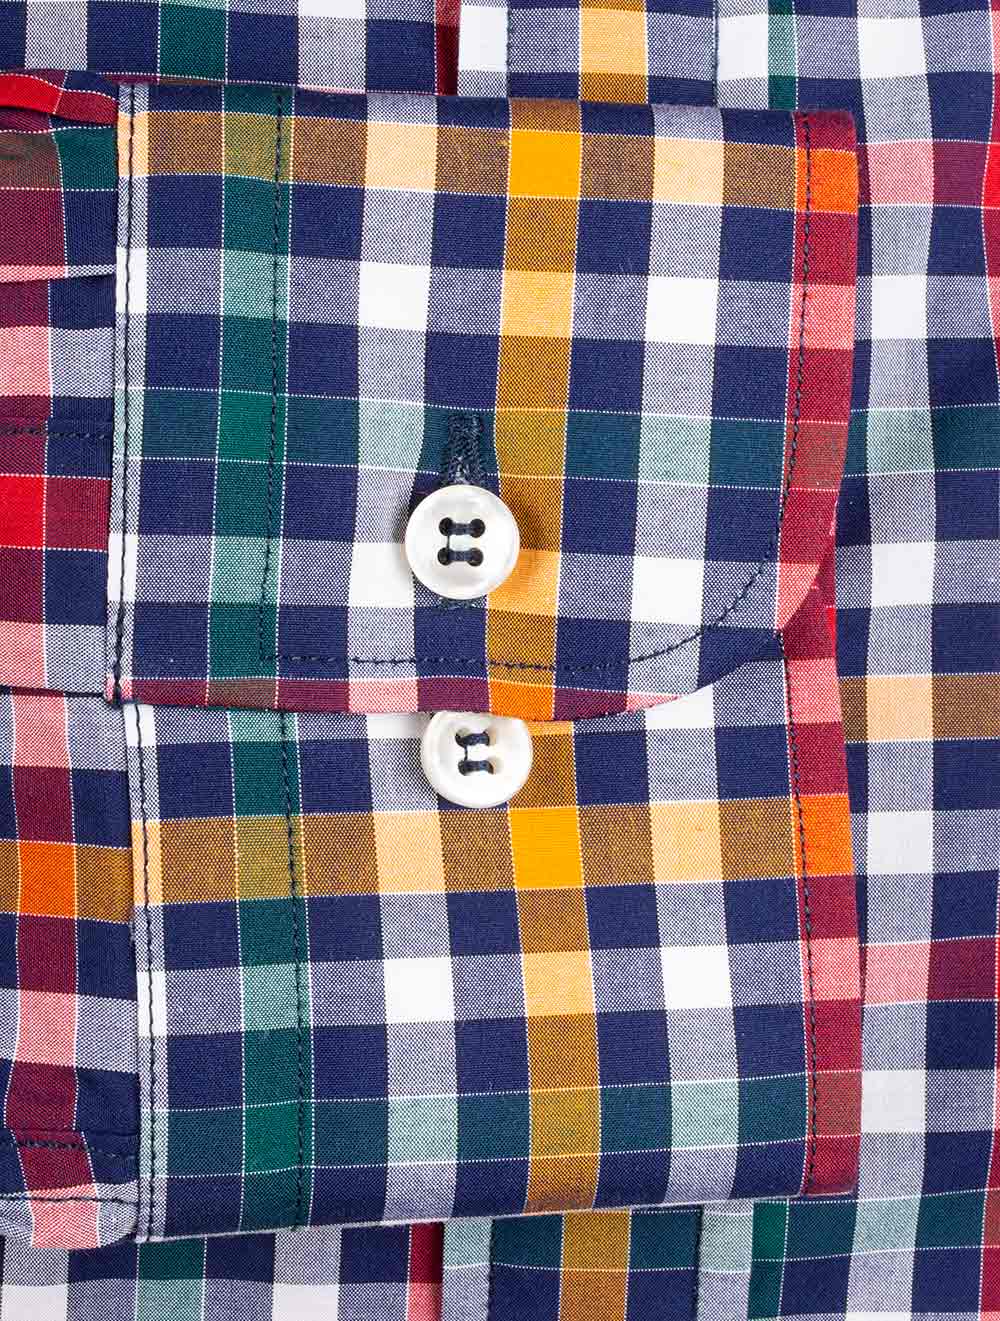 Check Button Down Shirt Red/navy/yellow